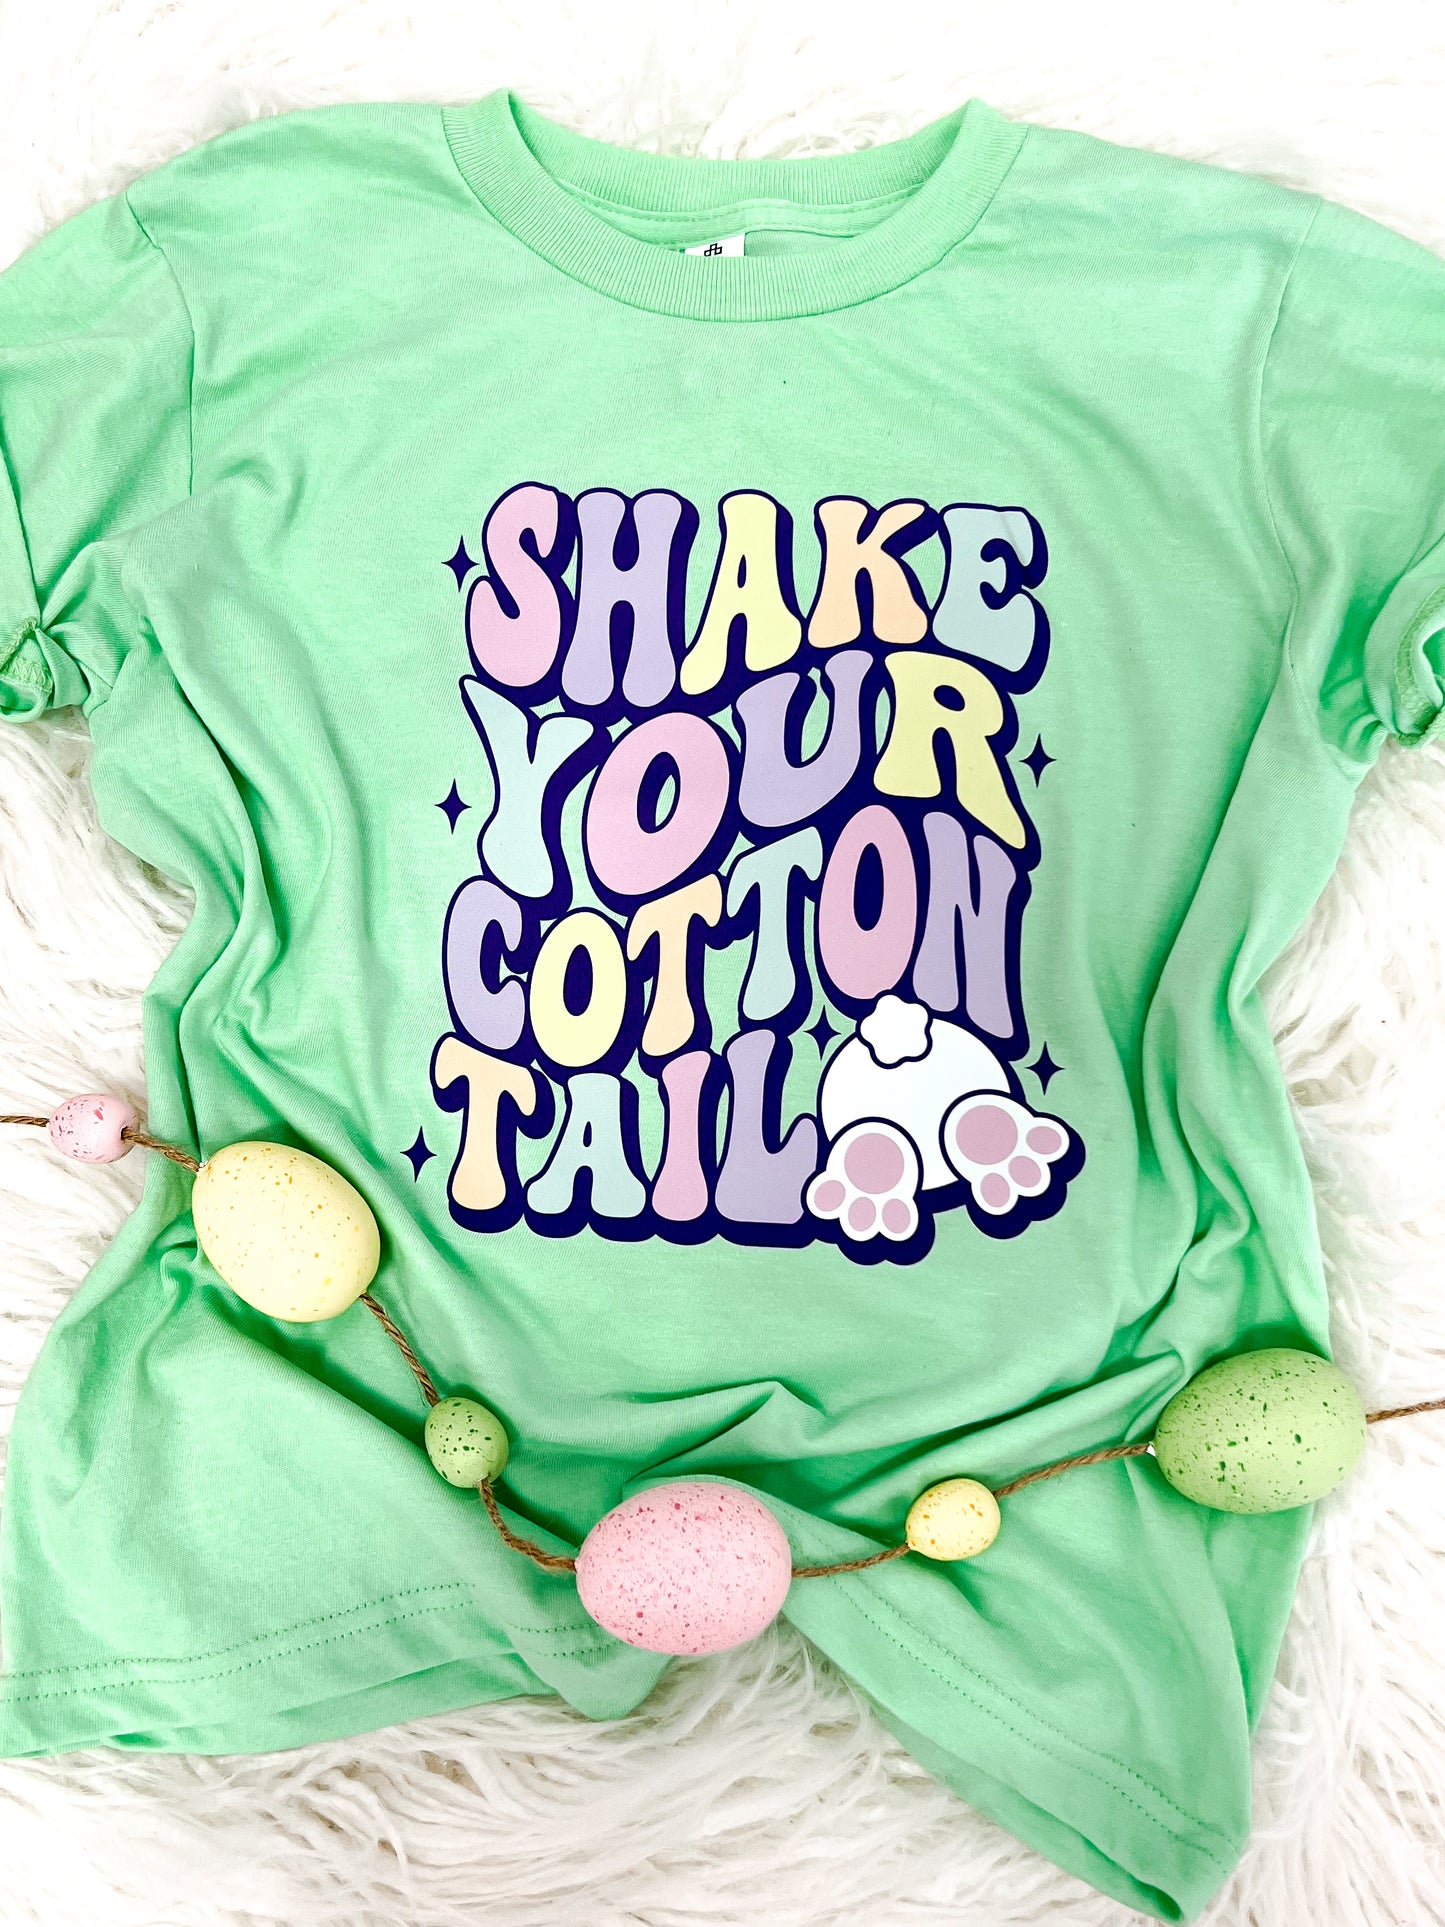 Shake Your Cotton Tail Youth Tee